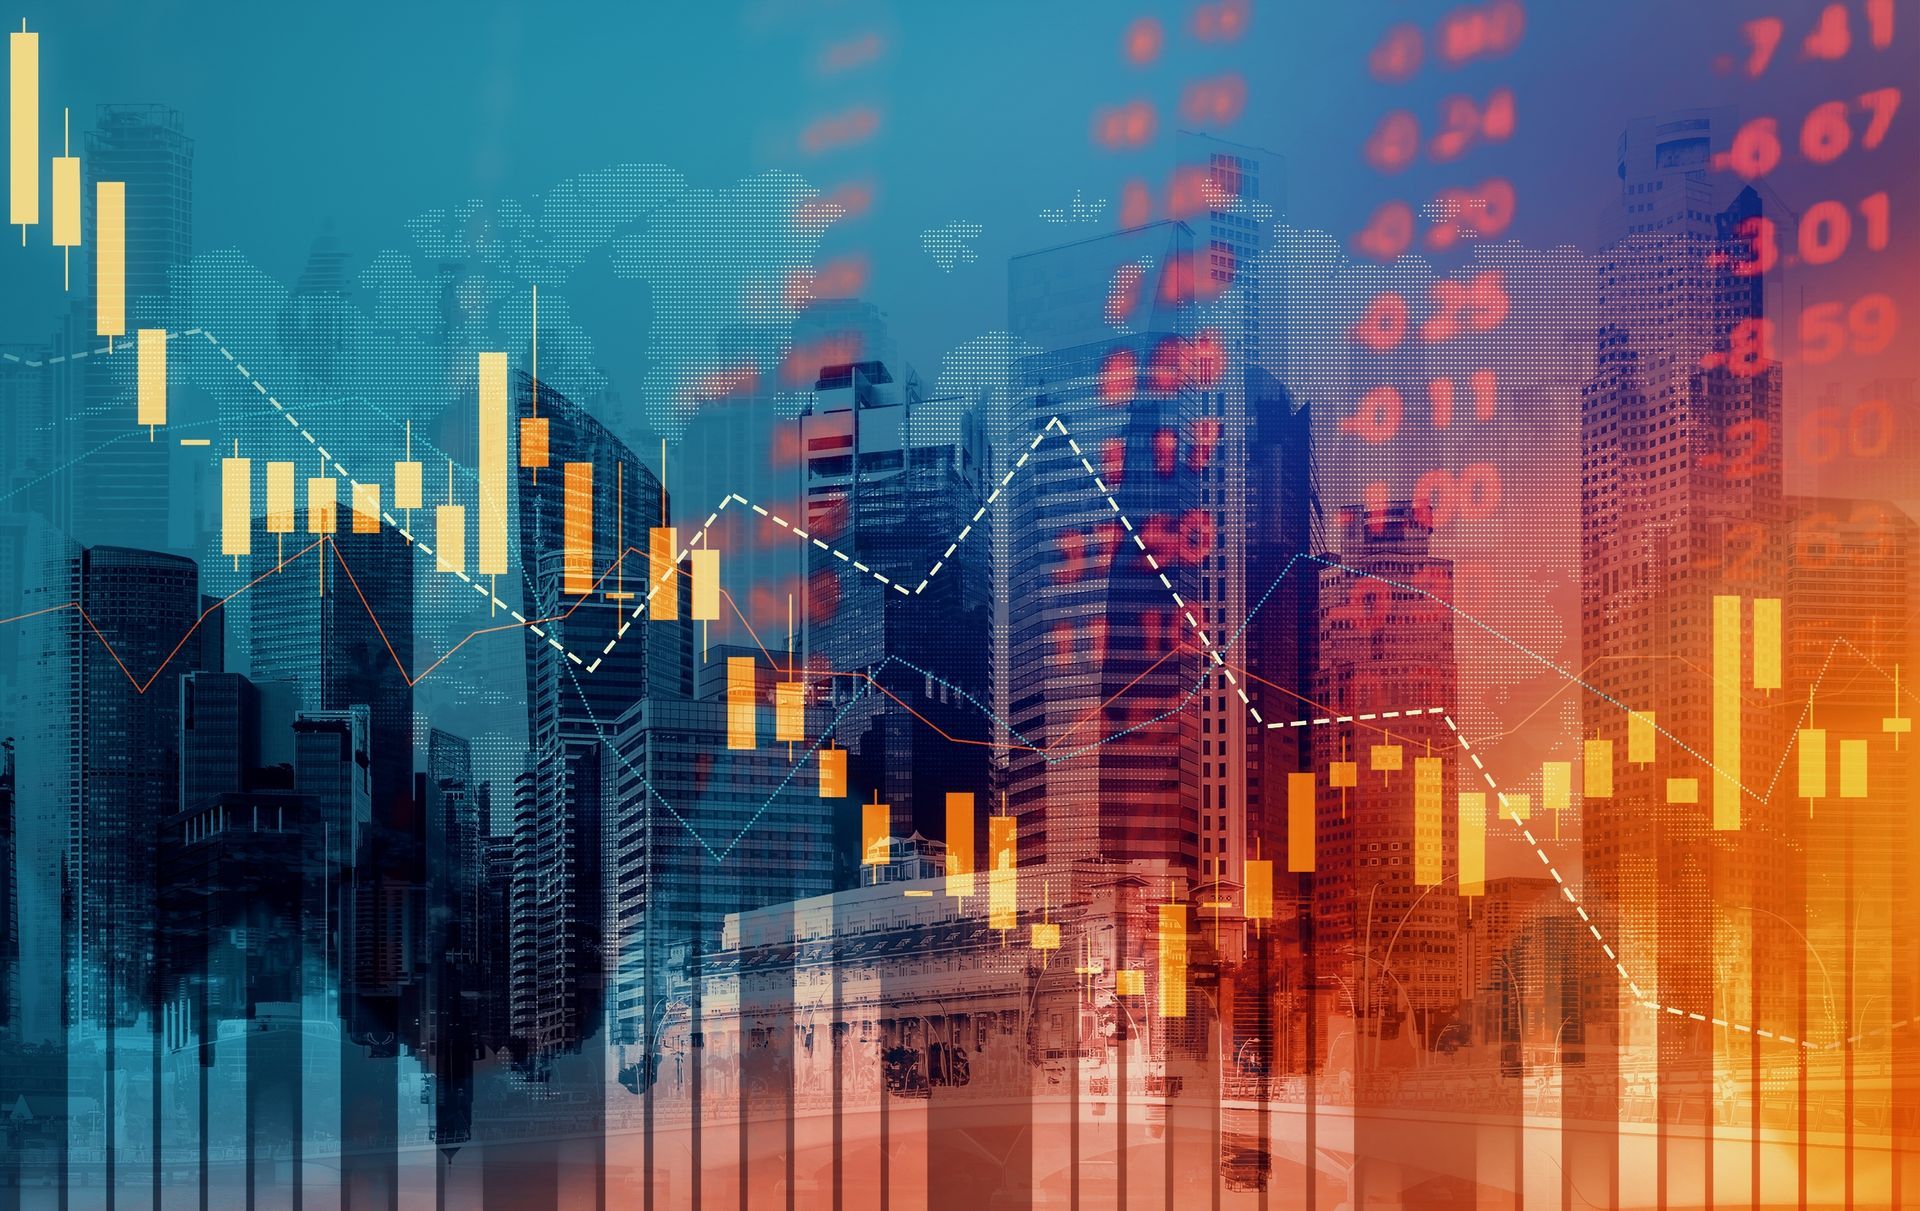 A stock market graph with a city skyline in the background.